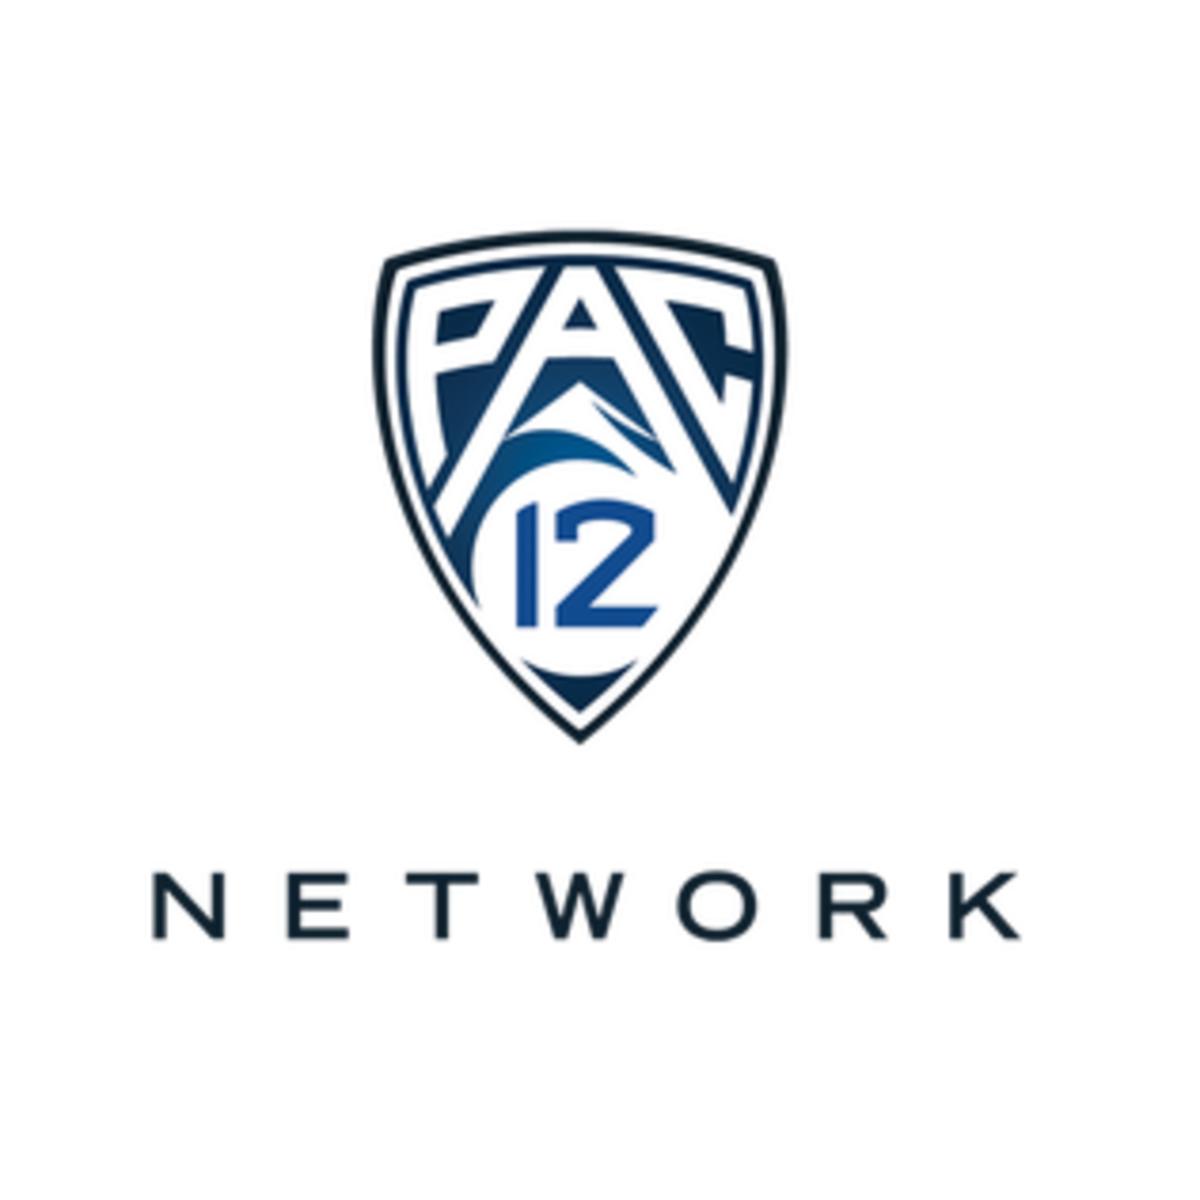 Watch Pac12 Network live stream online without cable How to Watch